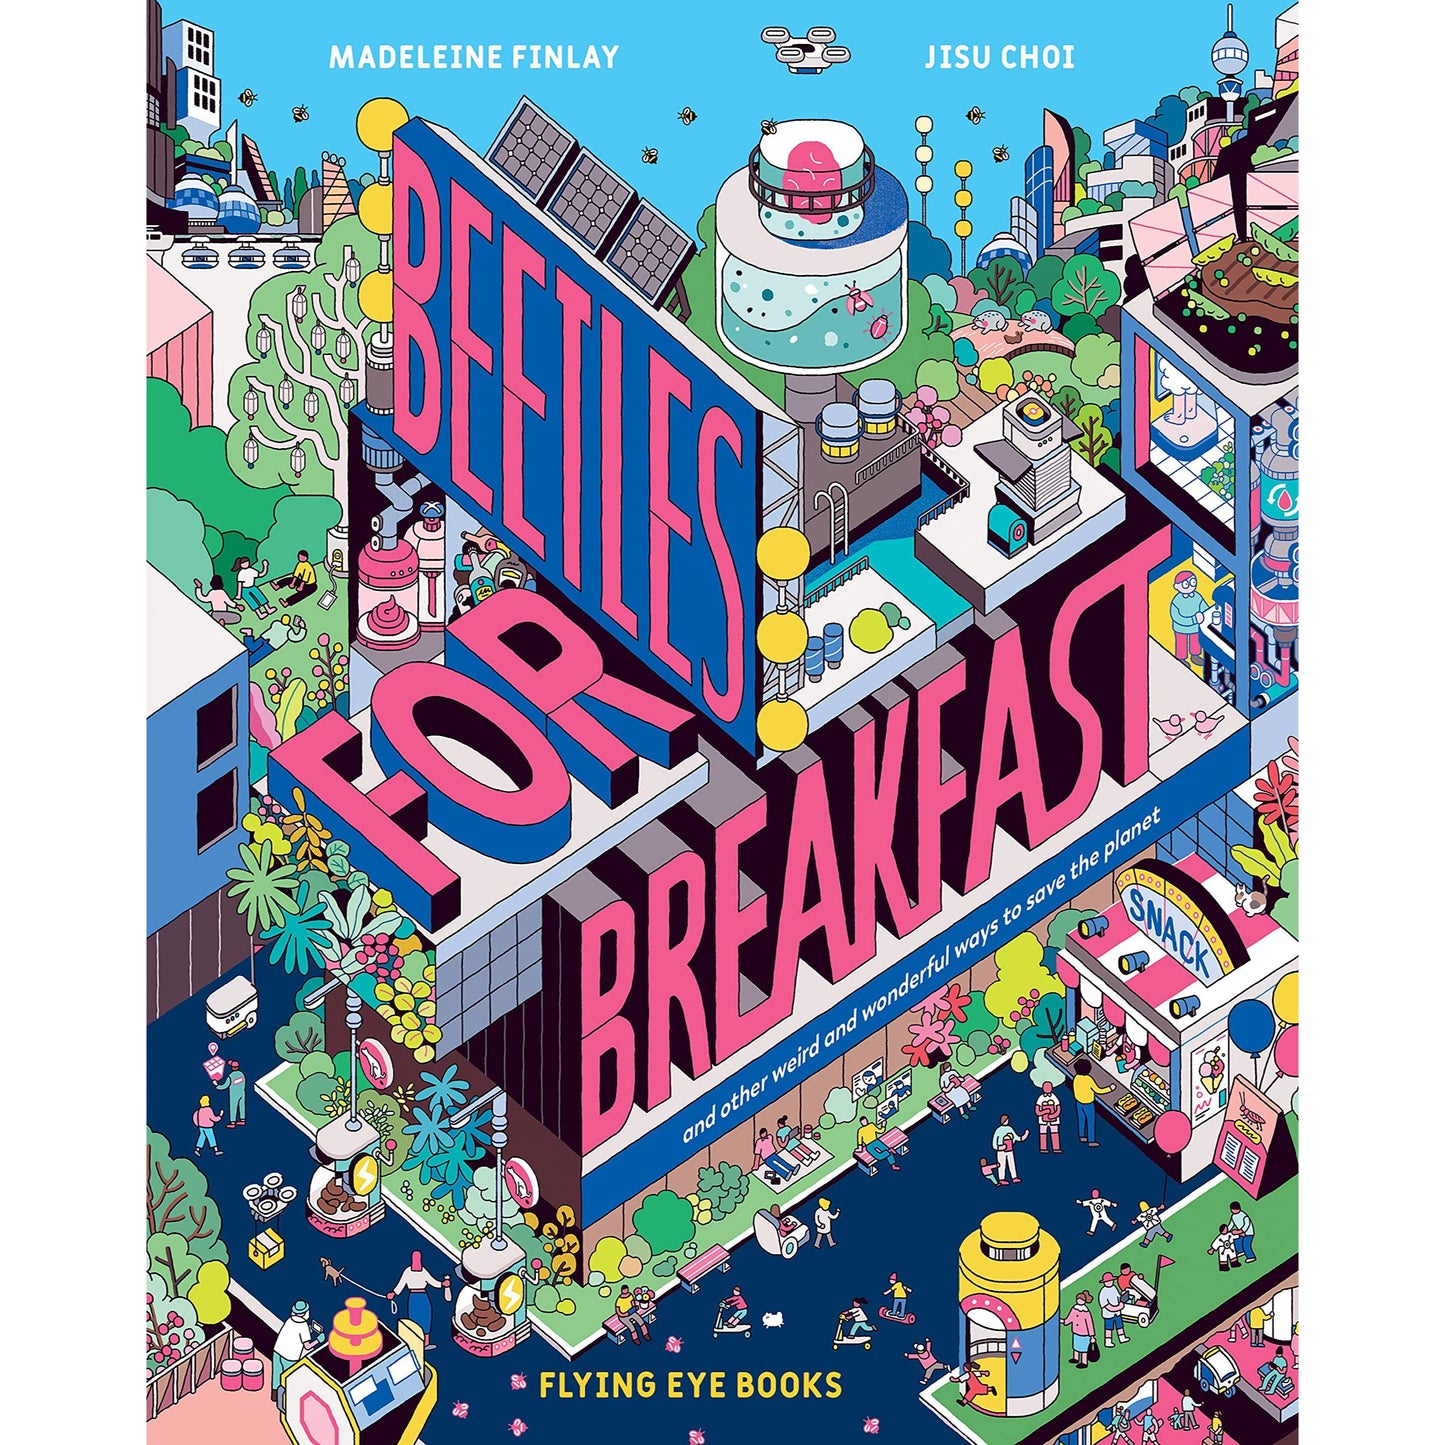 Beetles for Breakfast: And Other Weird and Wonderful Ways to Save the Planet